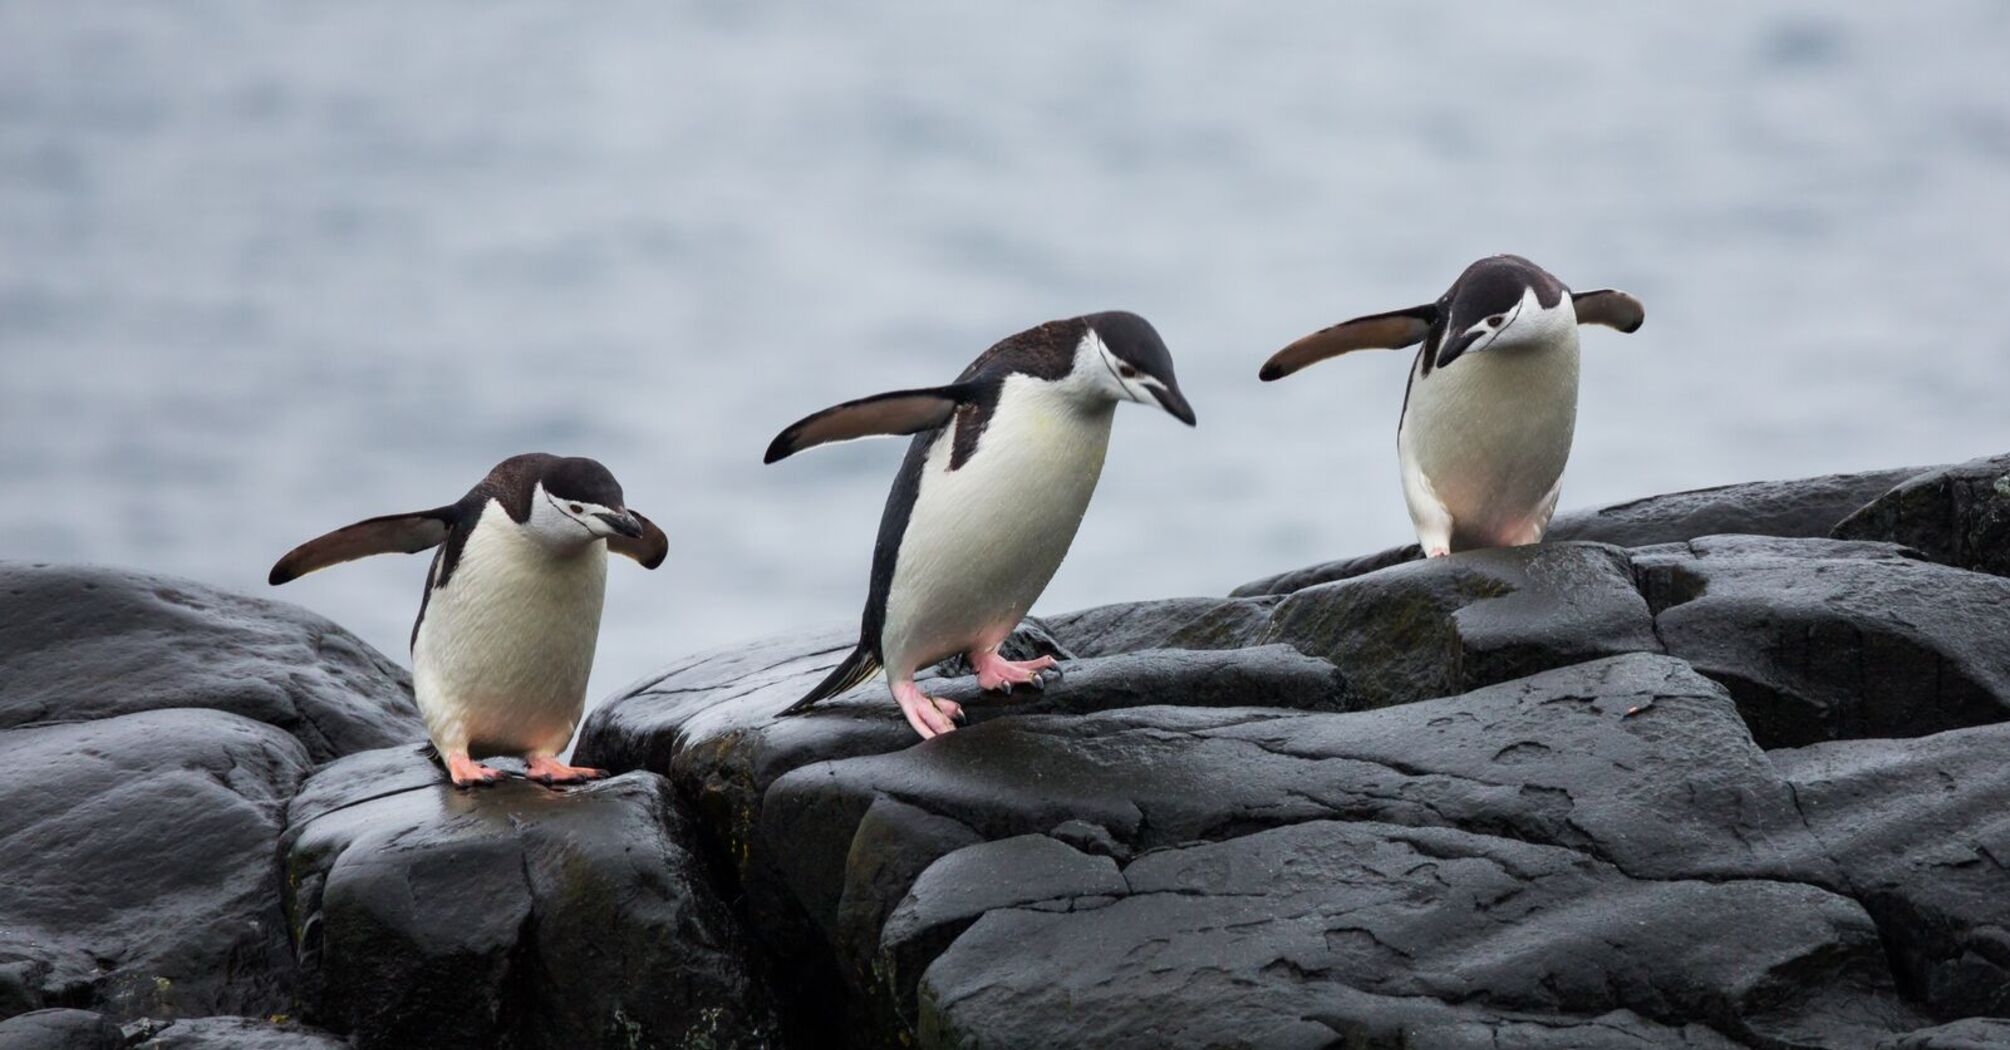 Sick passenger on board led to a new penguin colony discovery: Researchers share a rare finding in the Antarctic